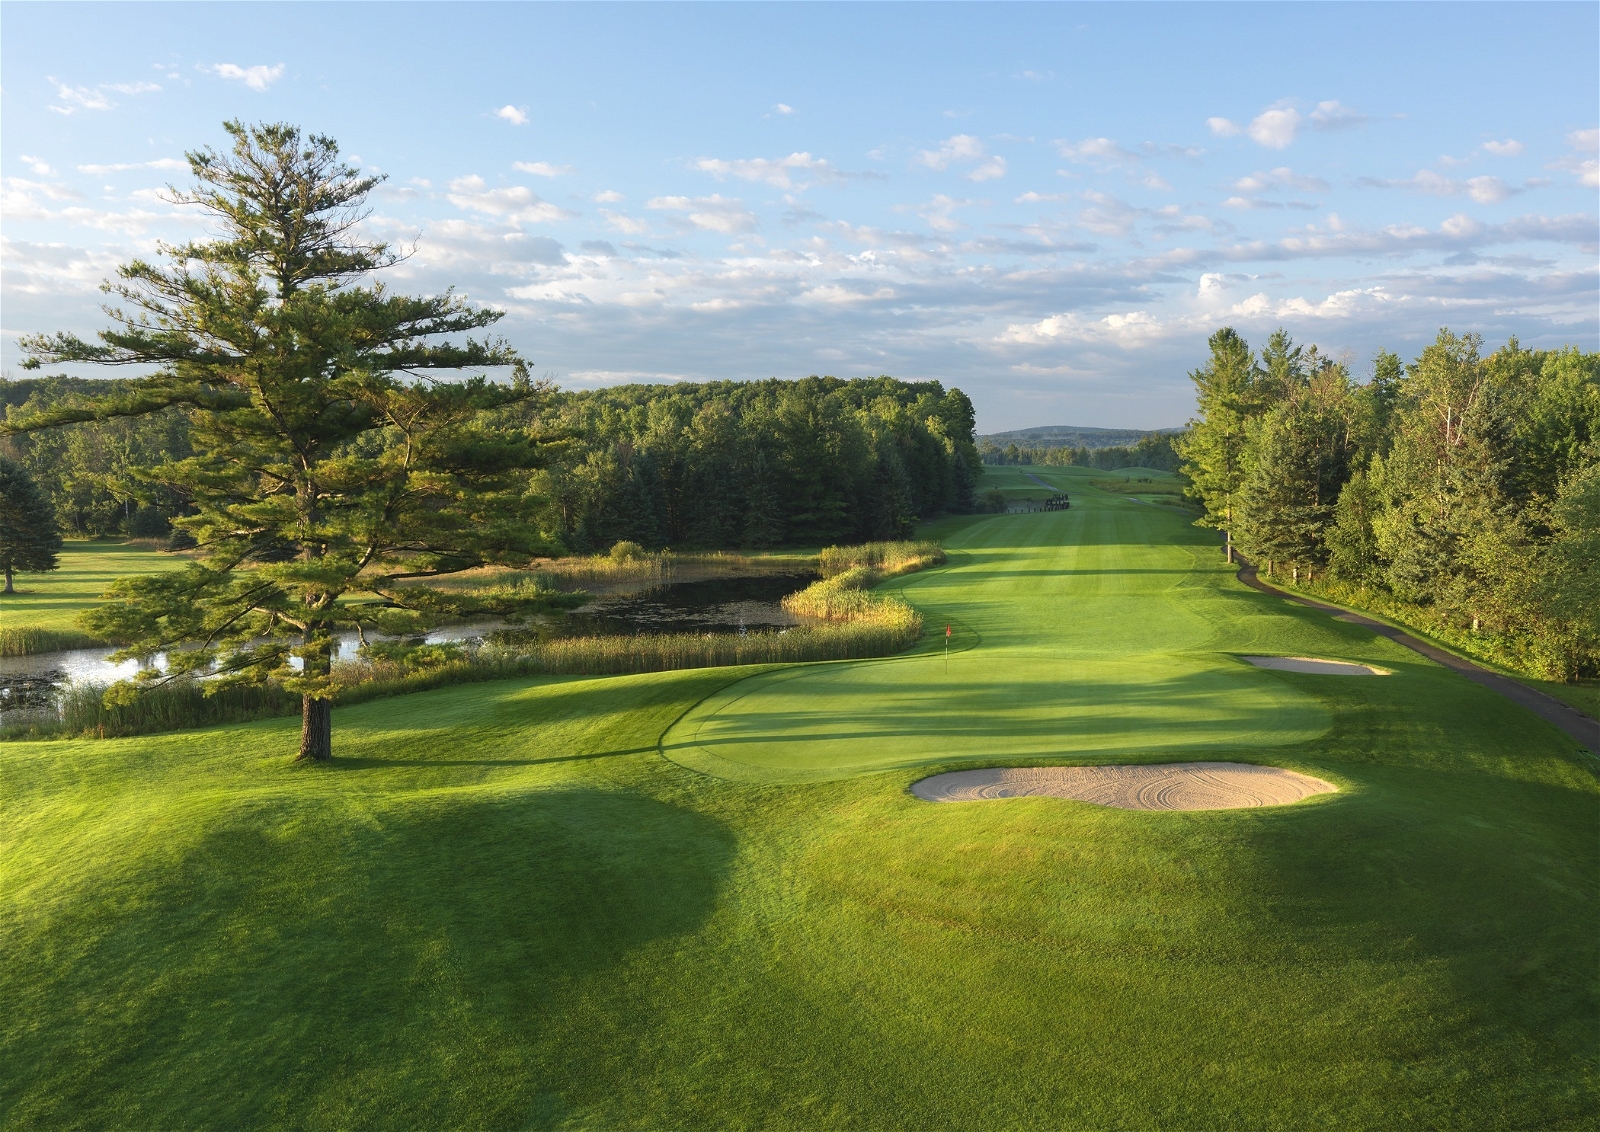 Golf Vacation Package - Boyne Mountain Resort from $327 per day!